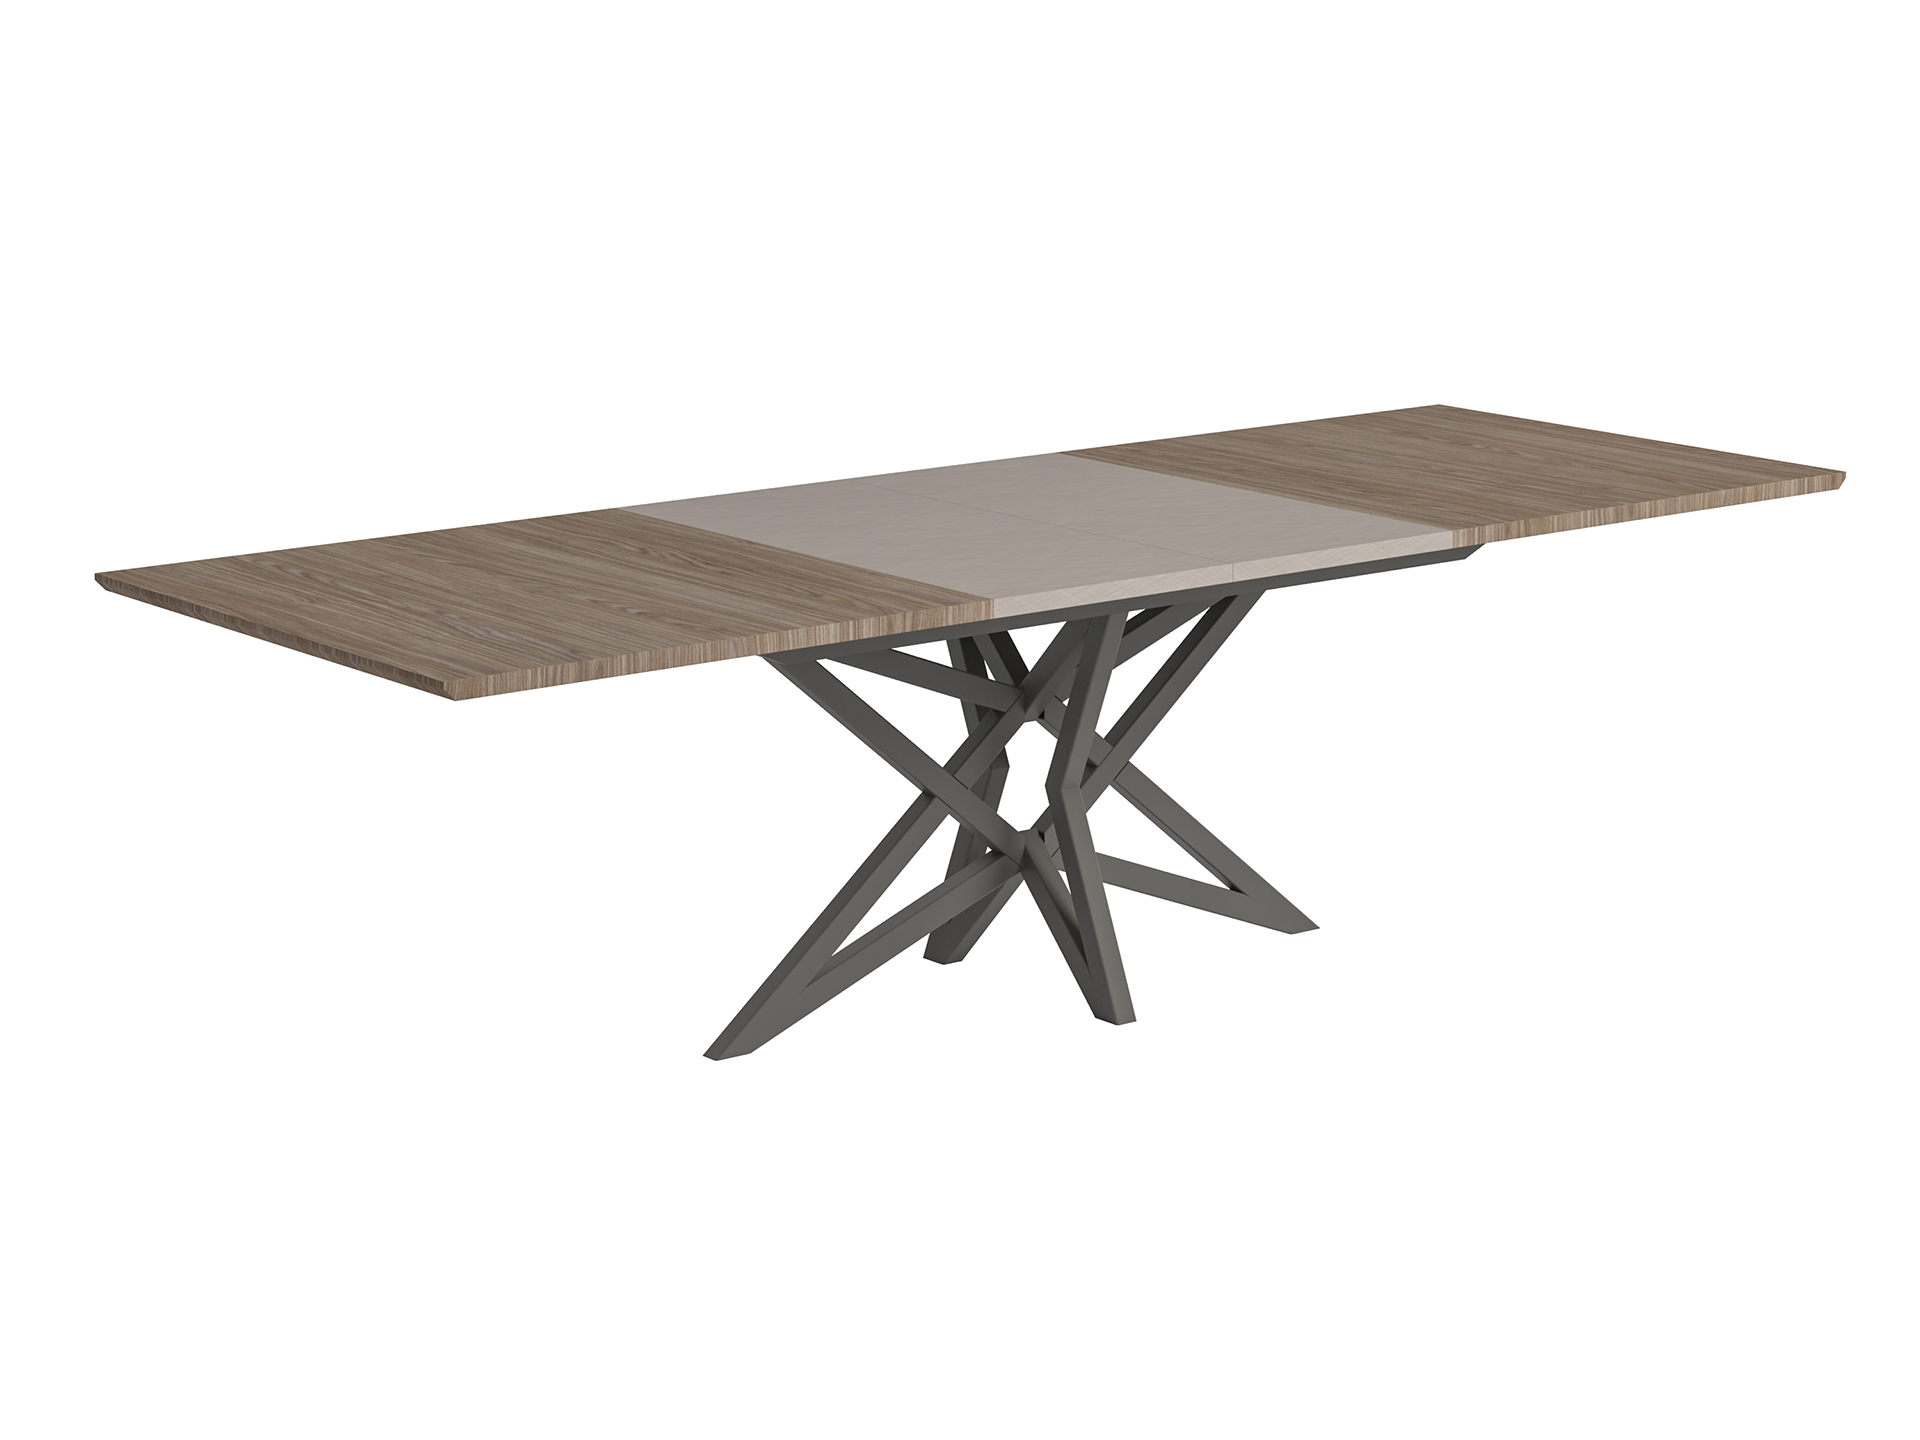 Brands Arredoclassic Dining Room, Italy Nora Dining table